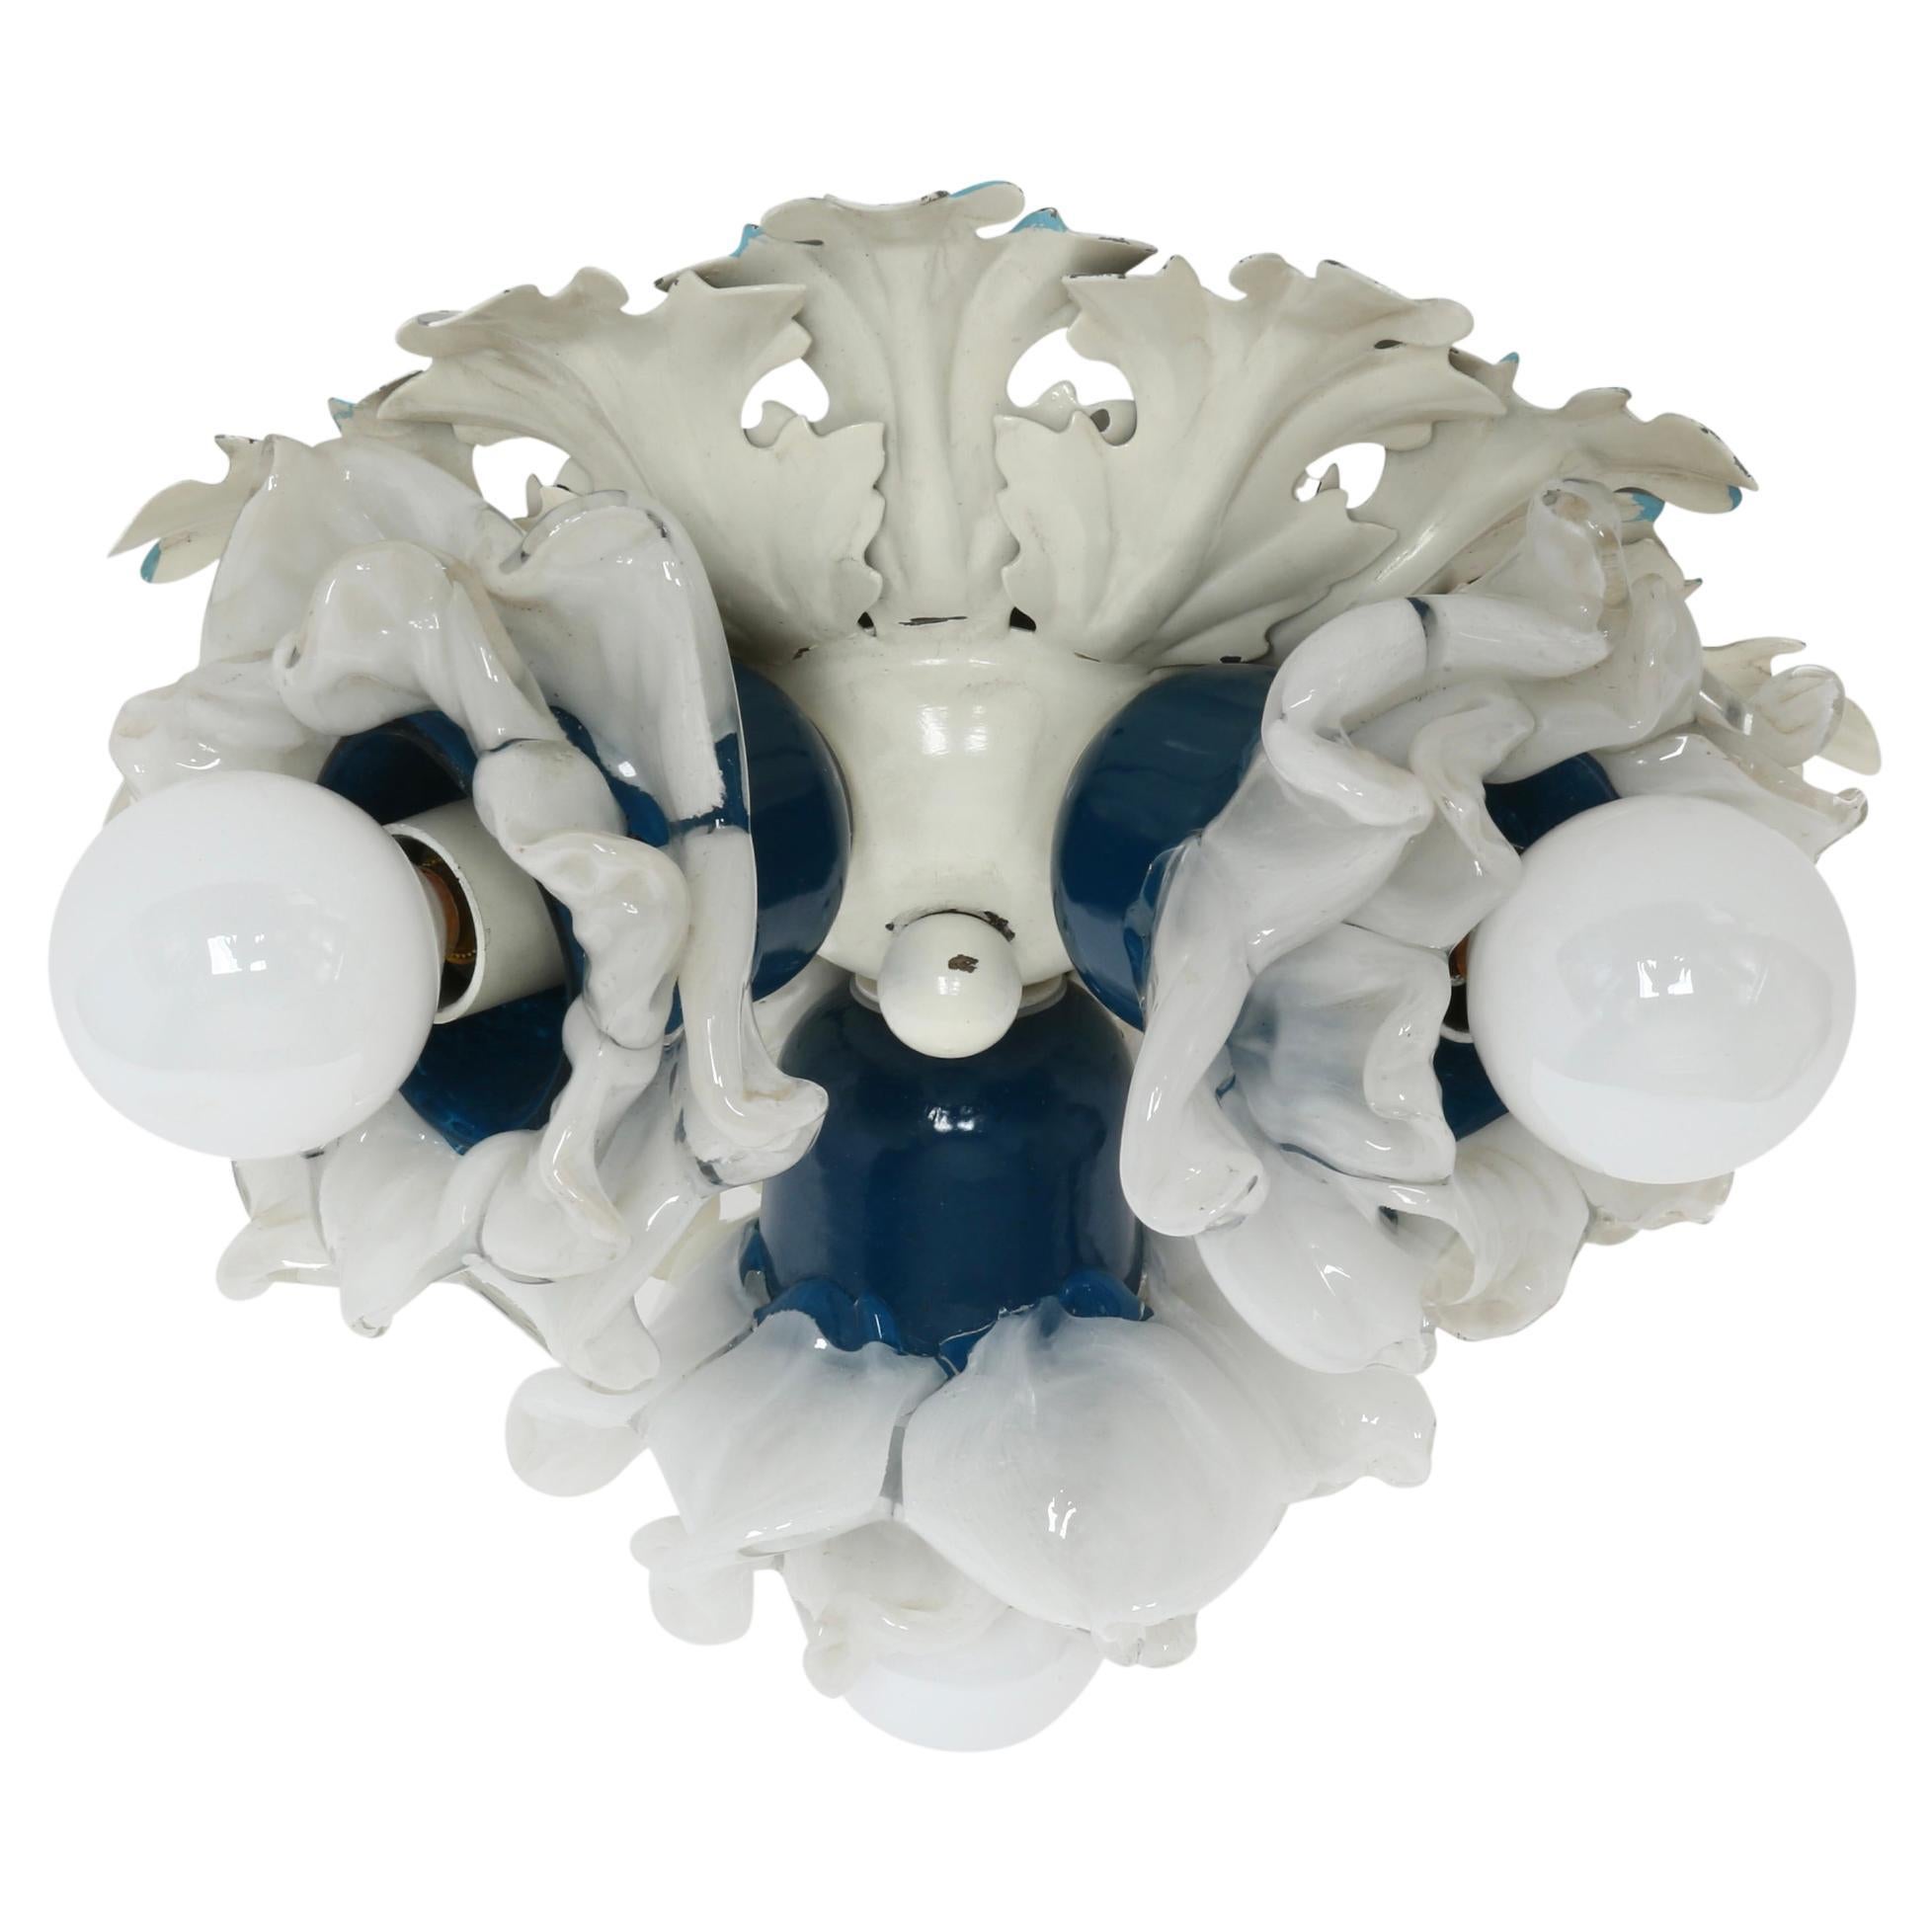 Pietro Chiesa for Fontana Arte attributed ceiling or wall light